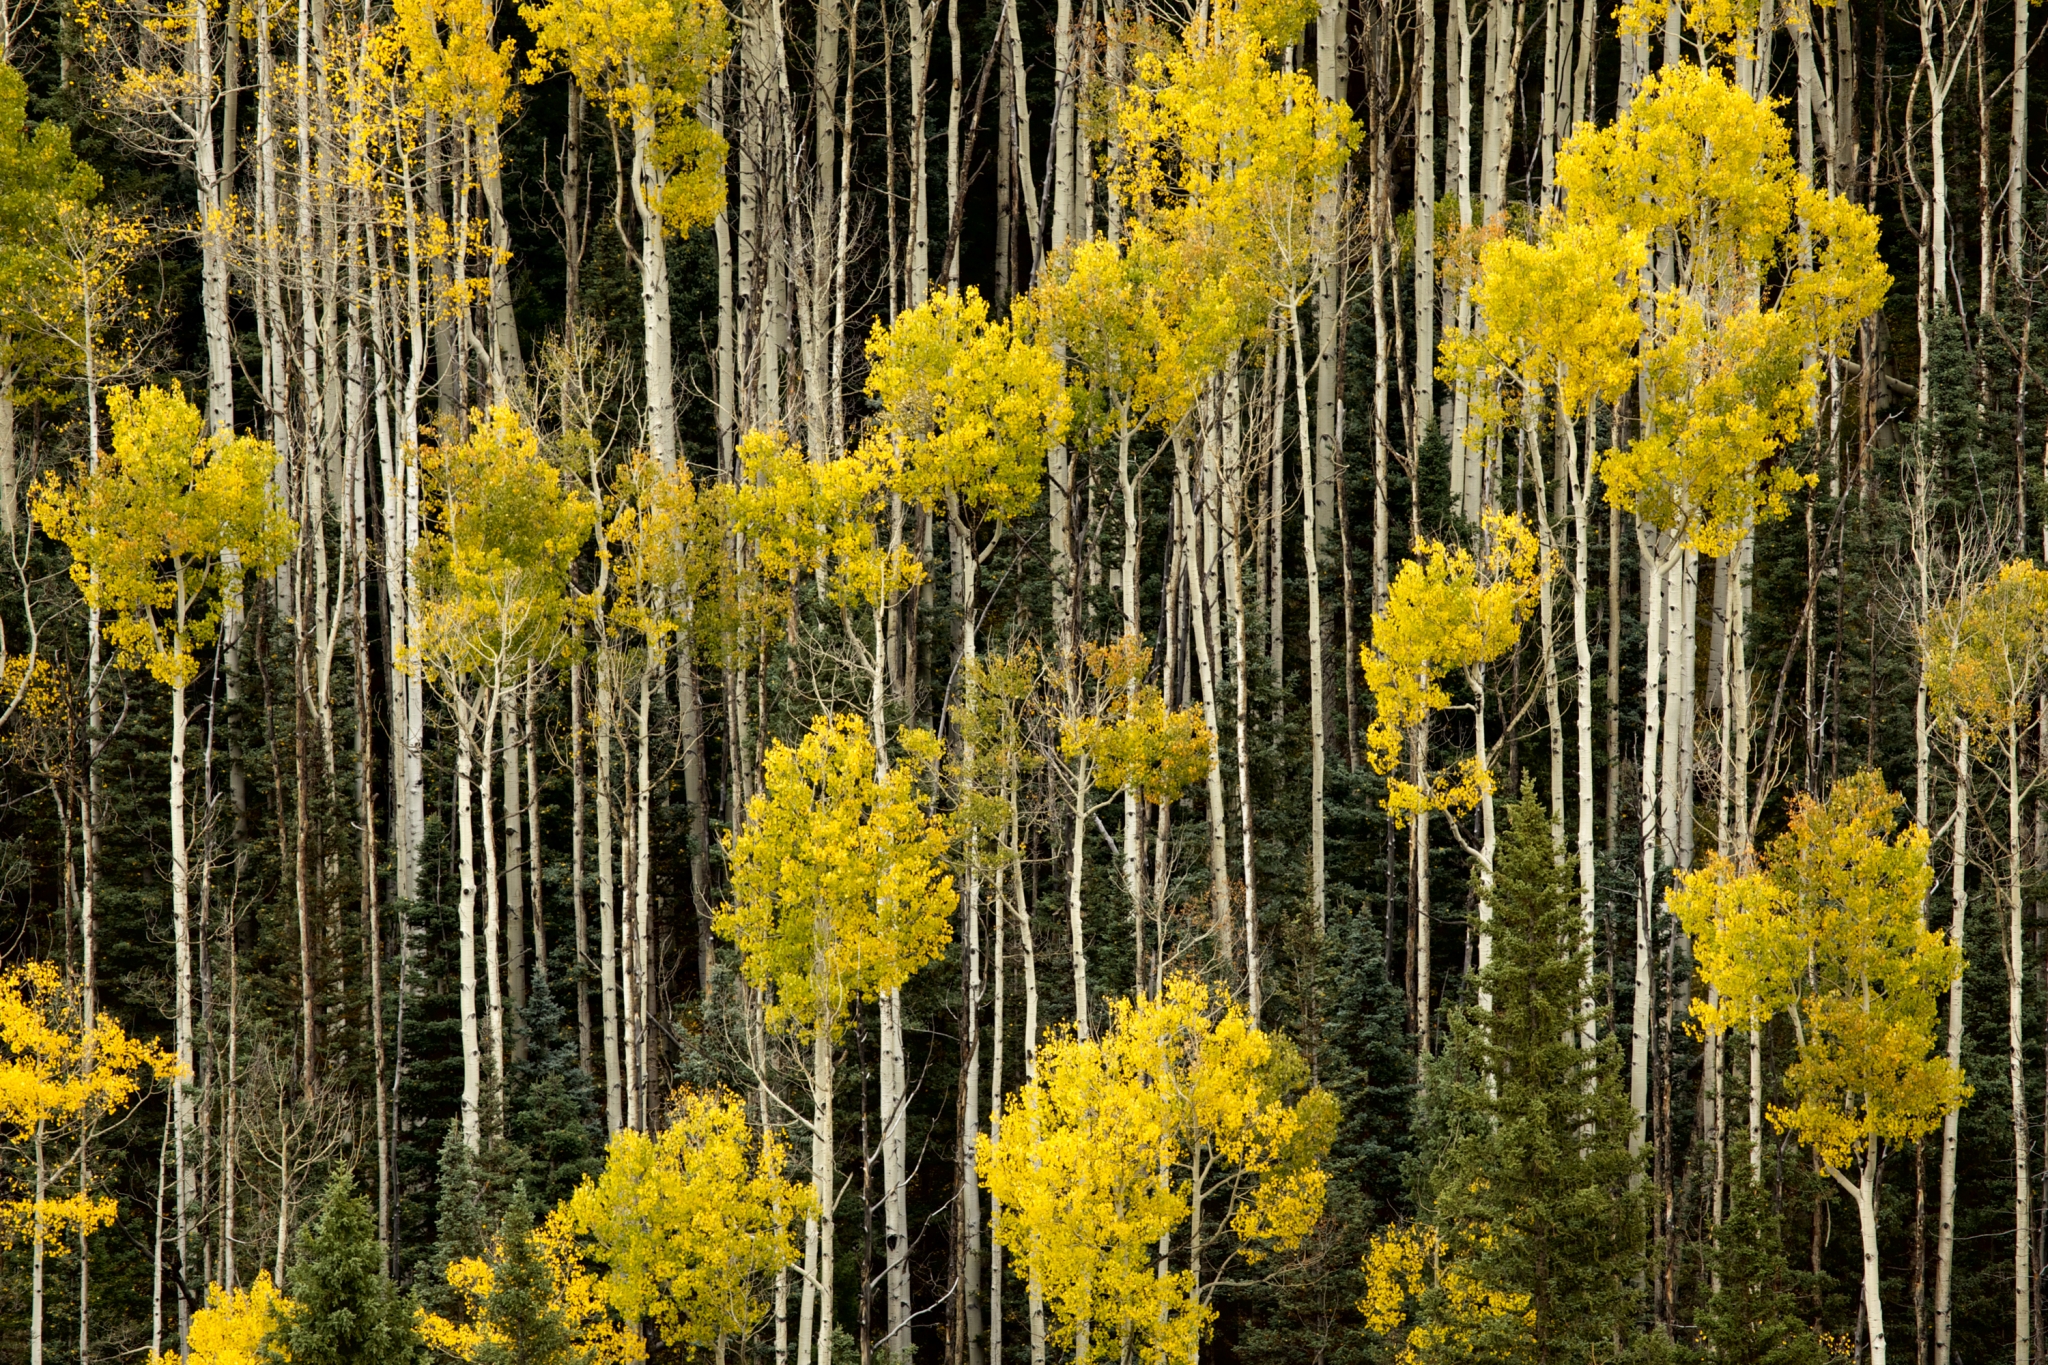 A forest of tall yellow birch trees